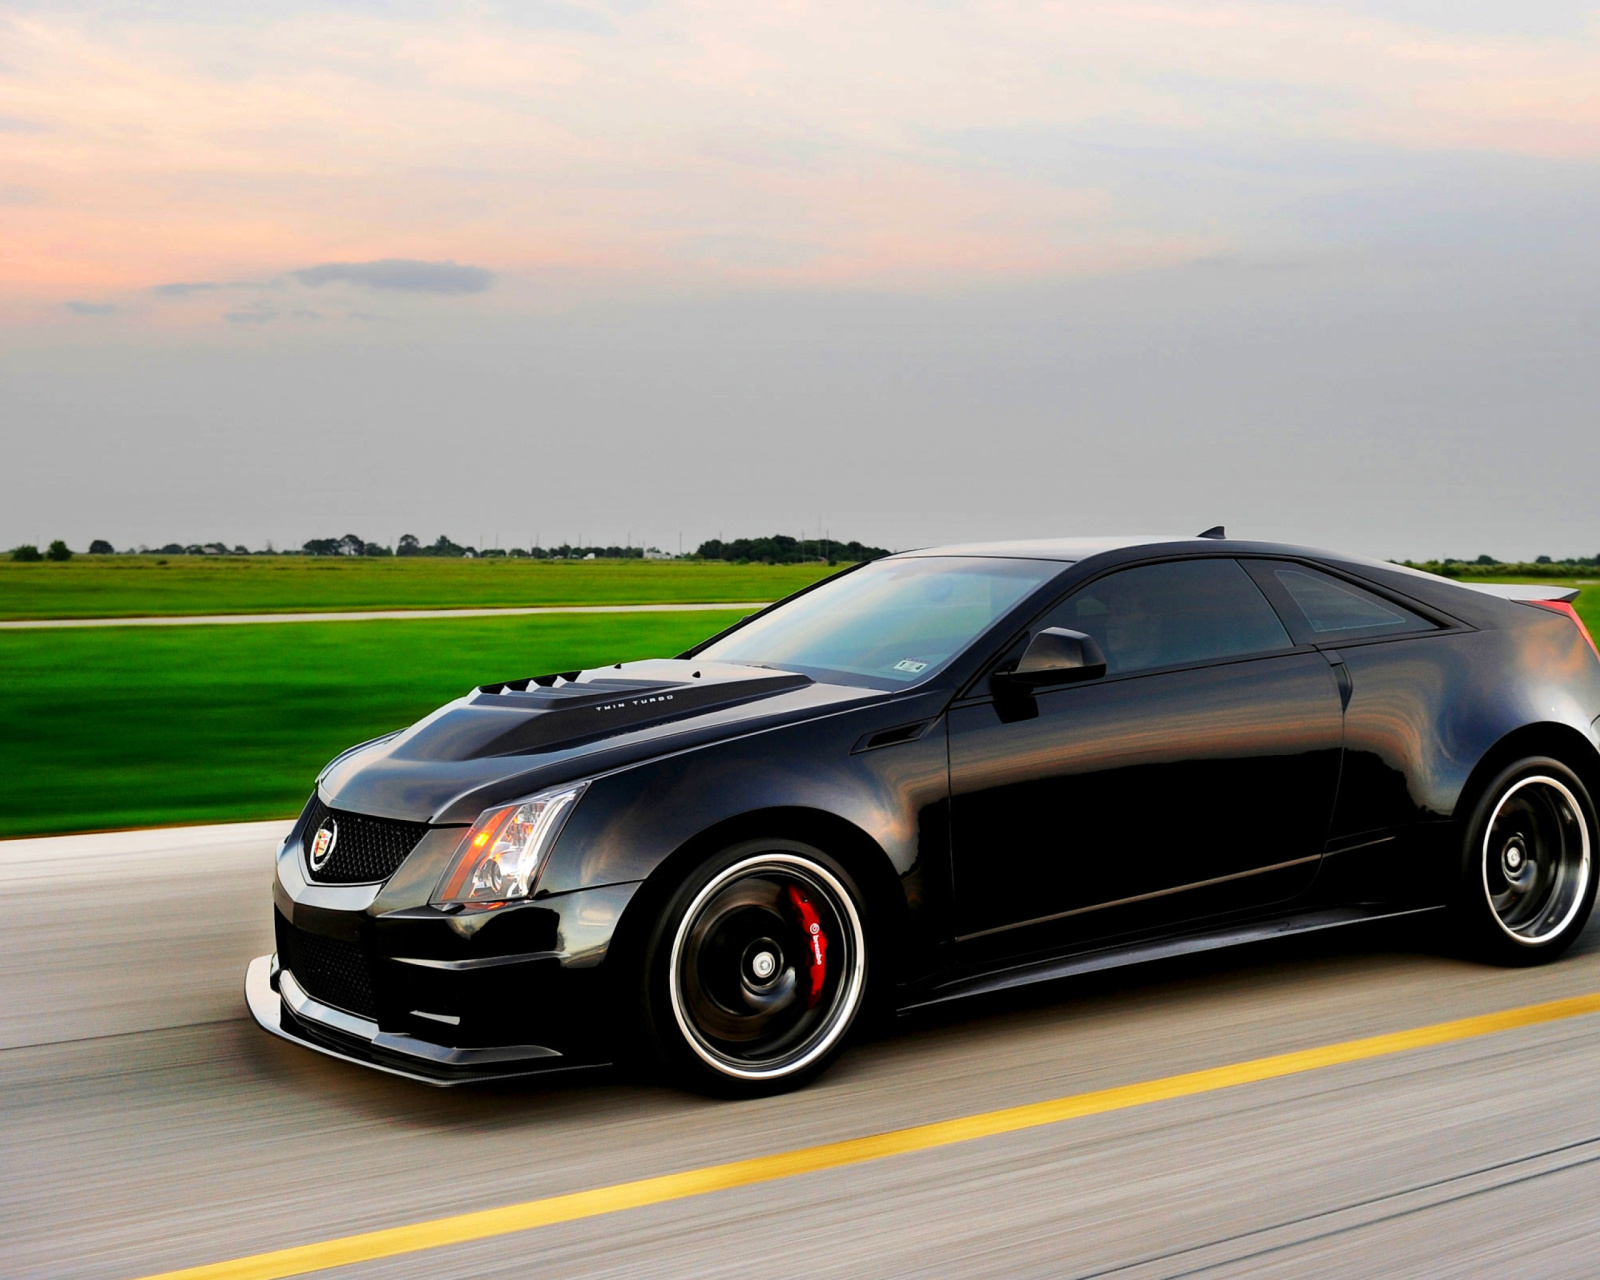 Cadillac CTS-V Coupe wallpaper 1600x1280